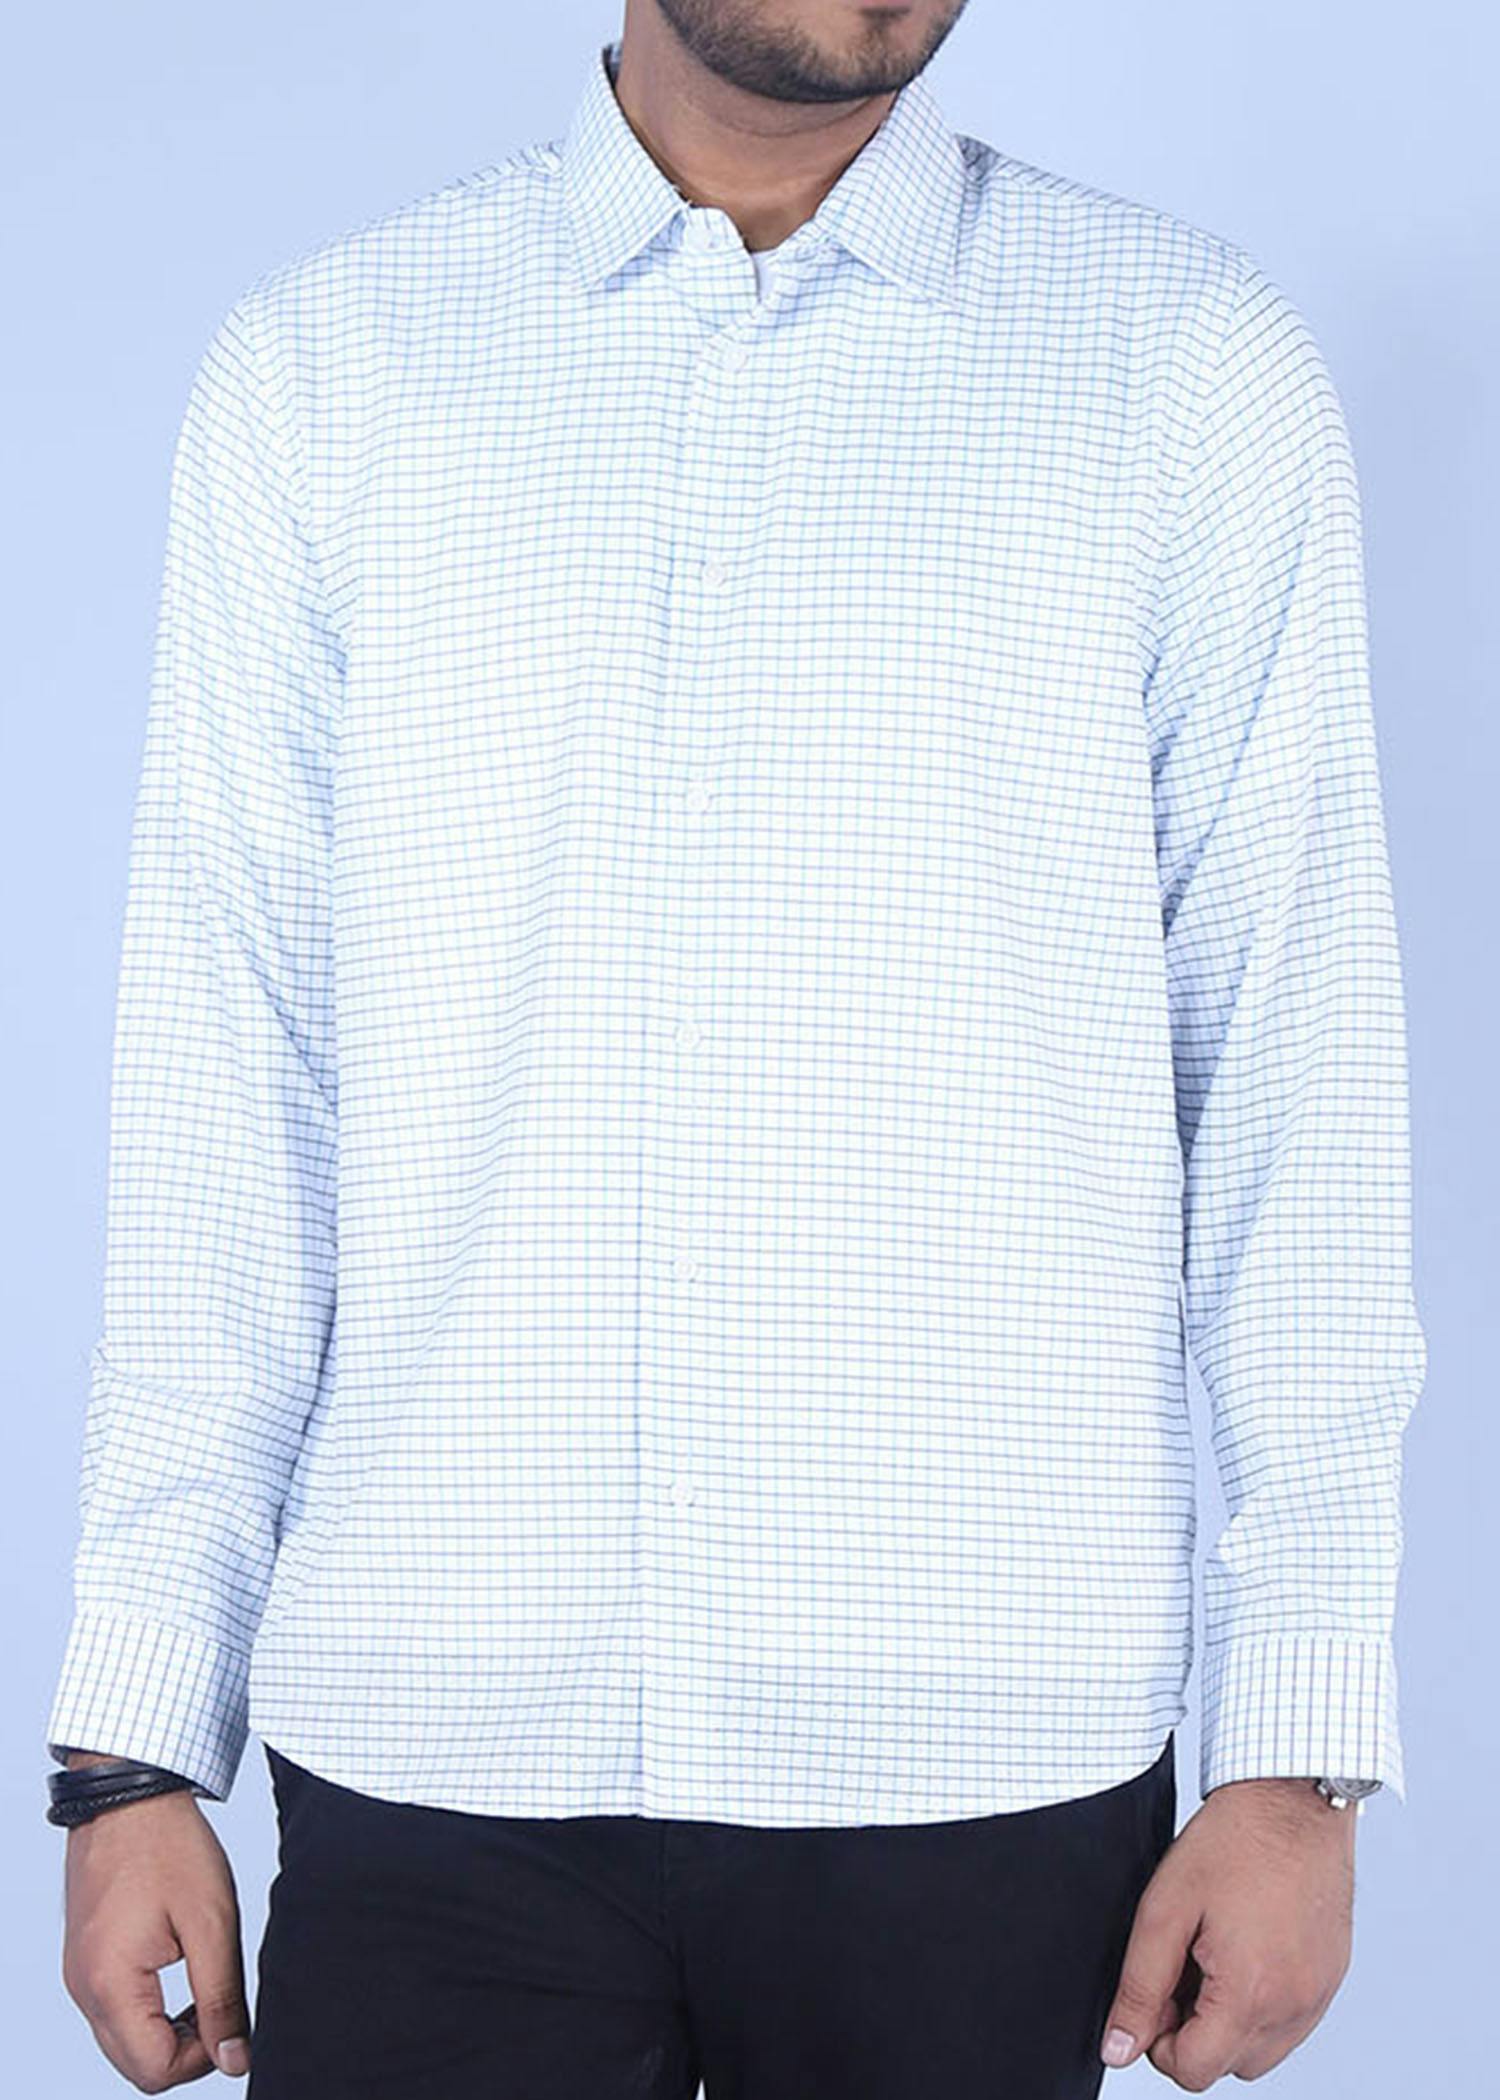 istanbul xxiv ls shirt white color headcropped